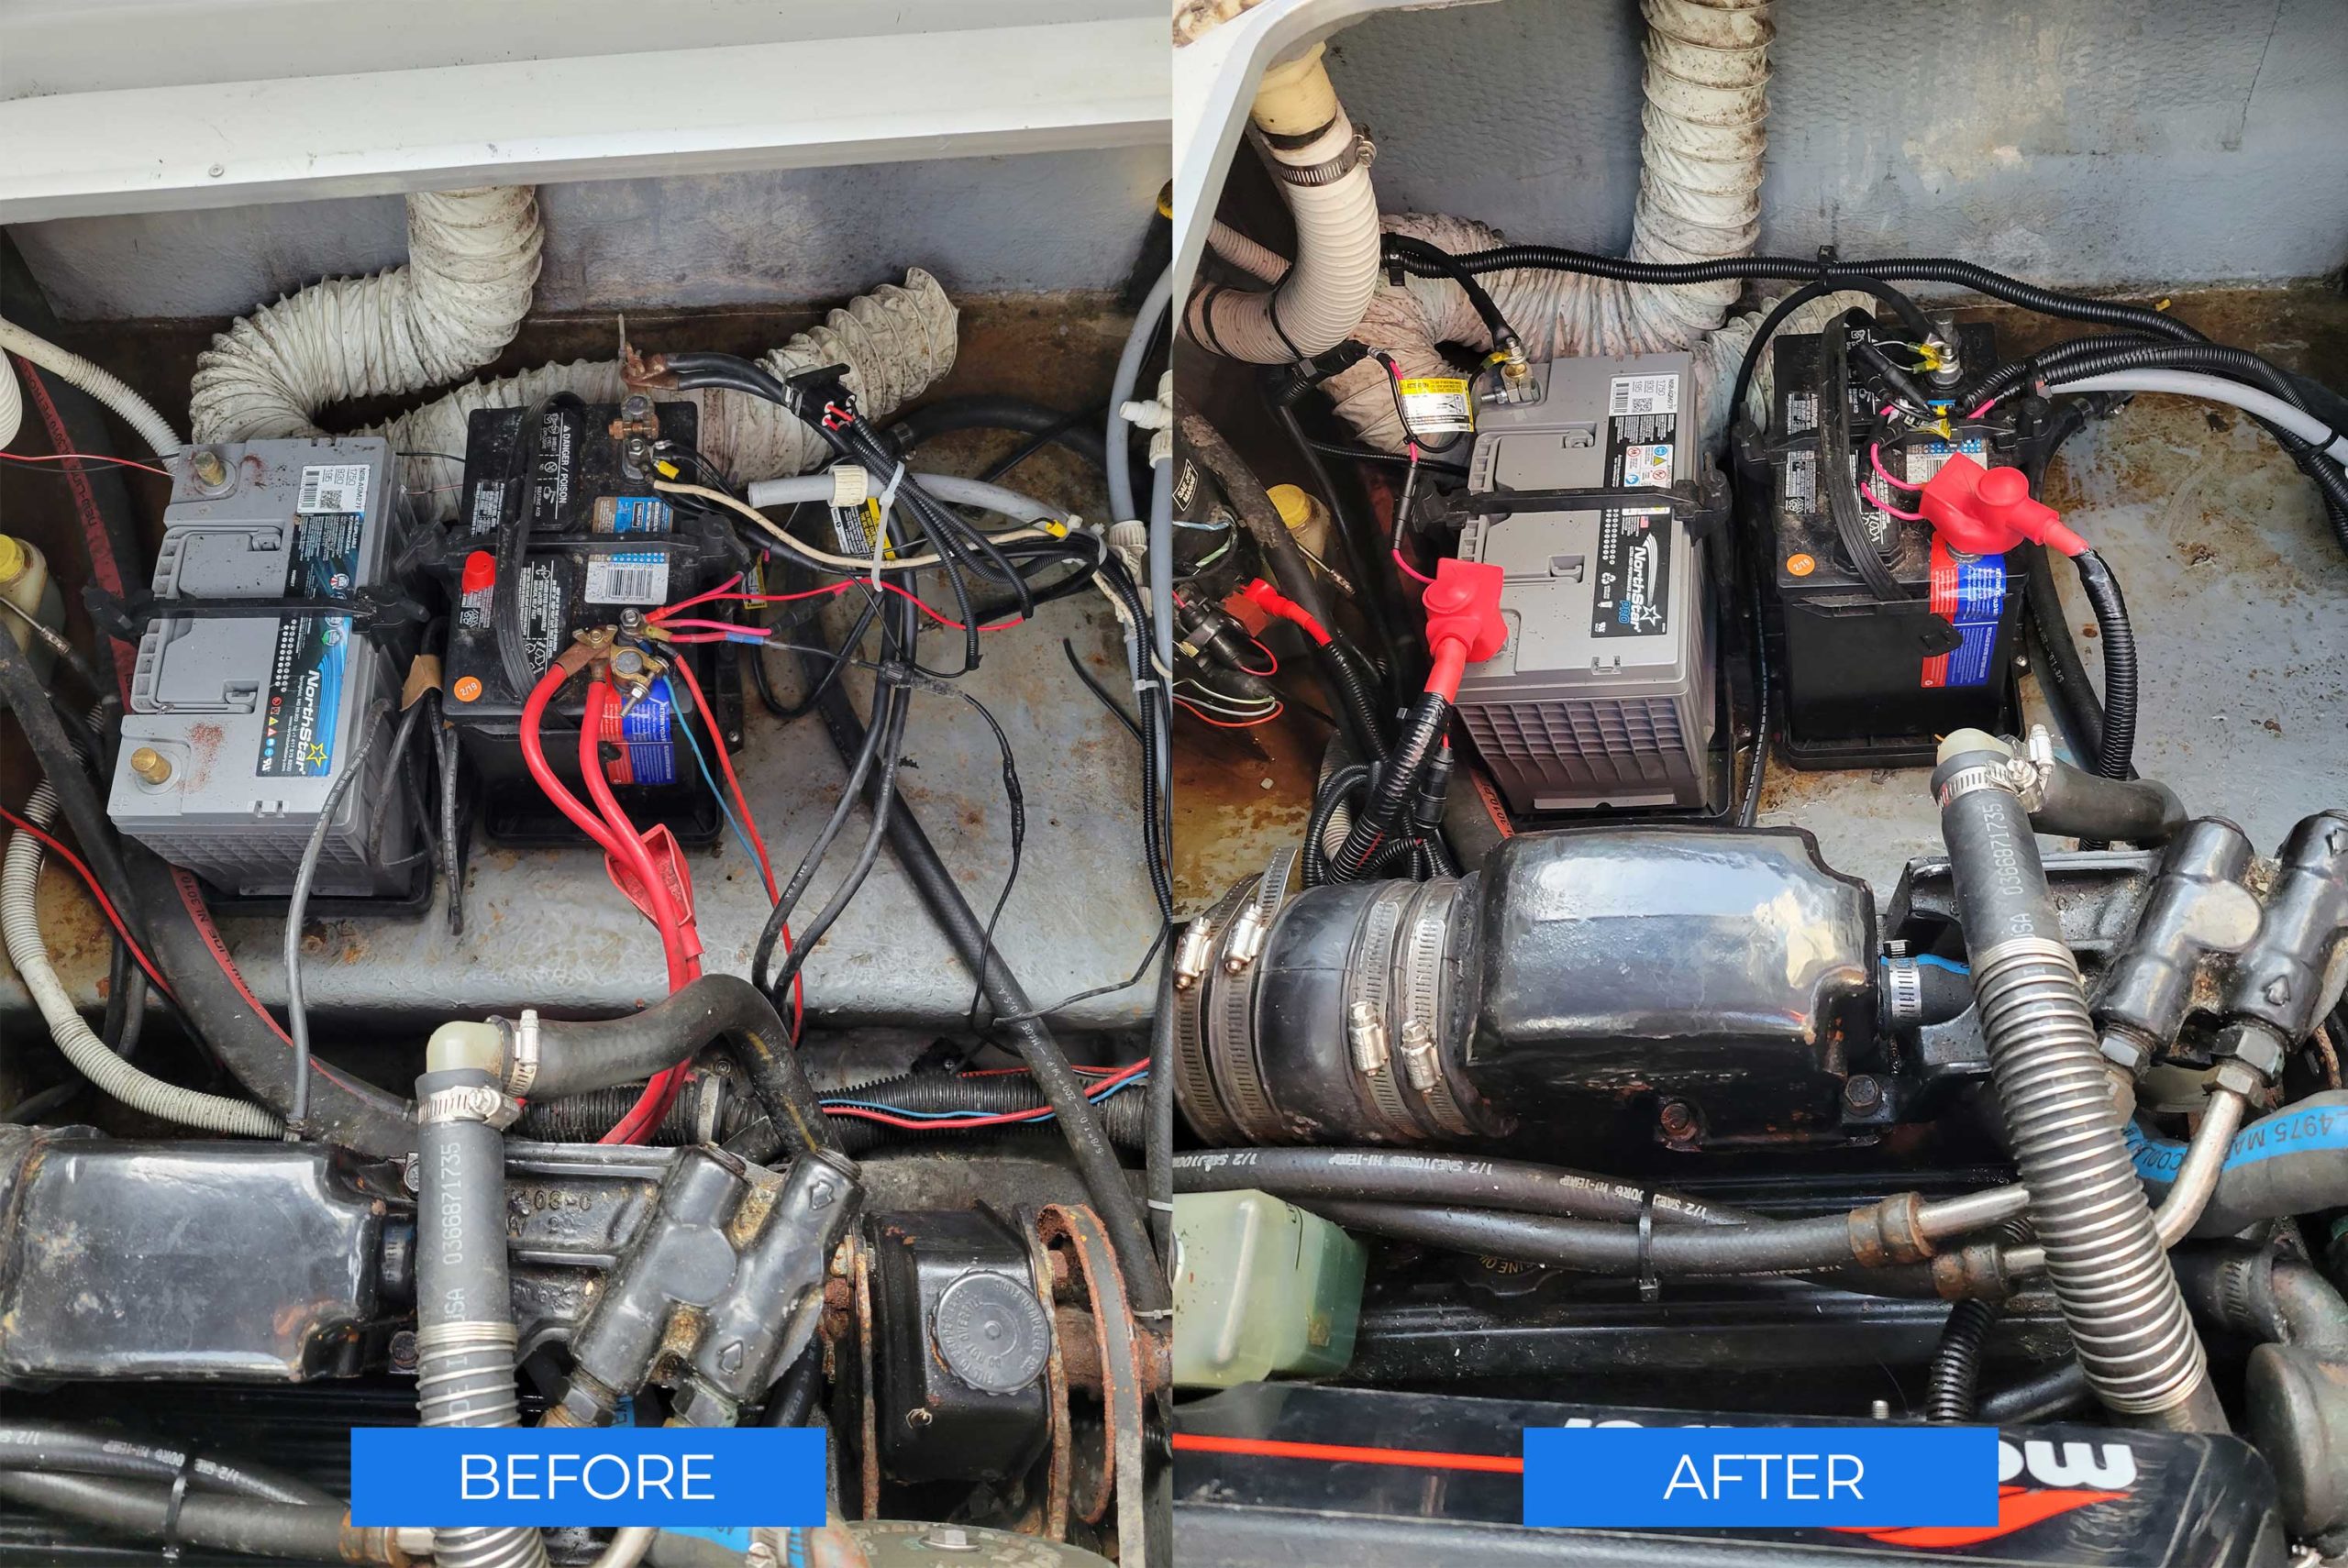 Livadia Before and After Part 3 | OS Marine & Boat Repair Services